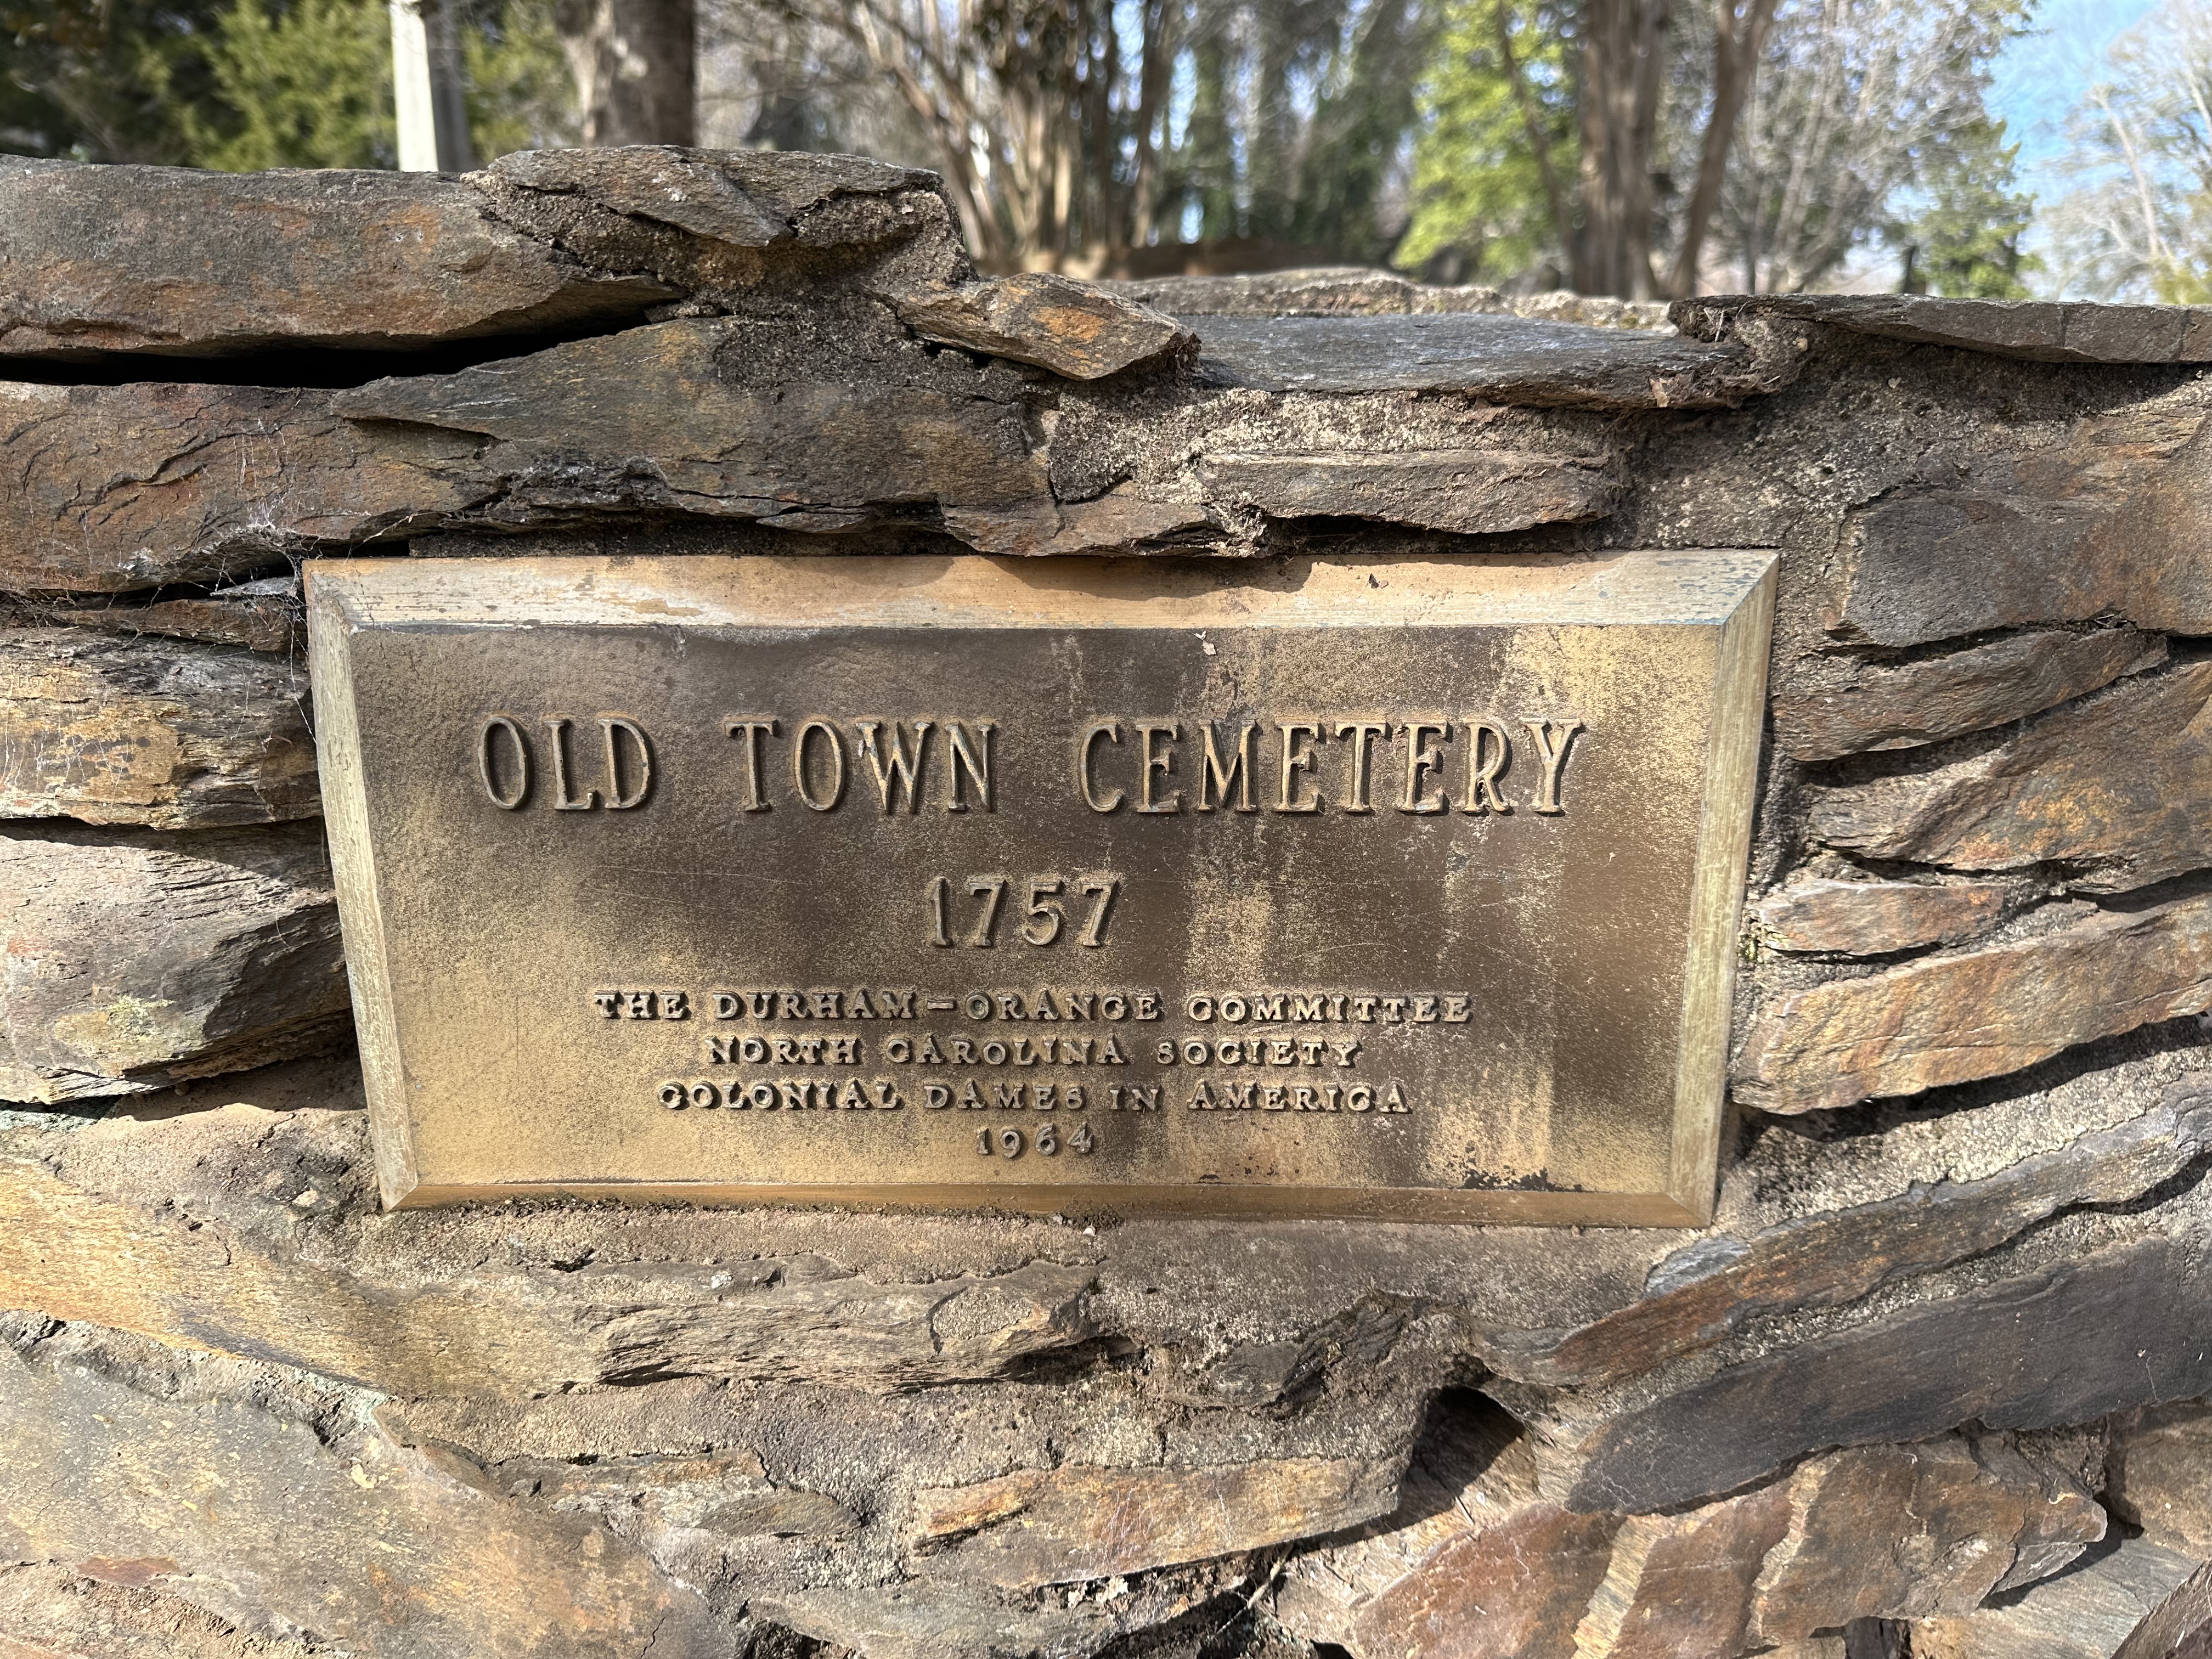 Old Town Cemetery marker in Hillsborough